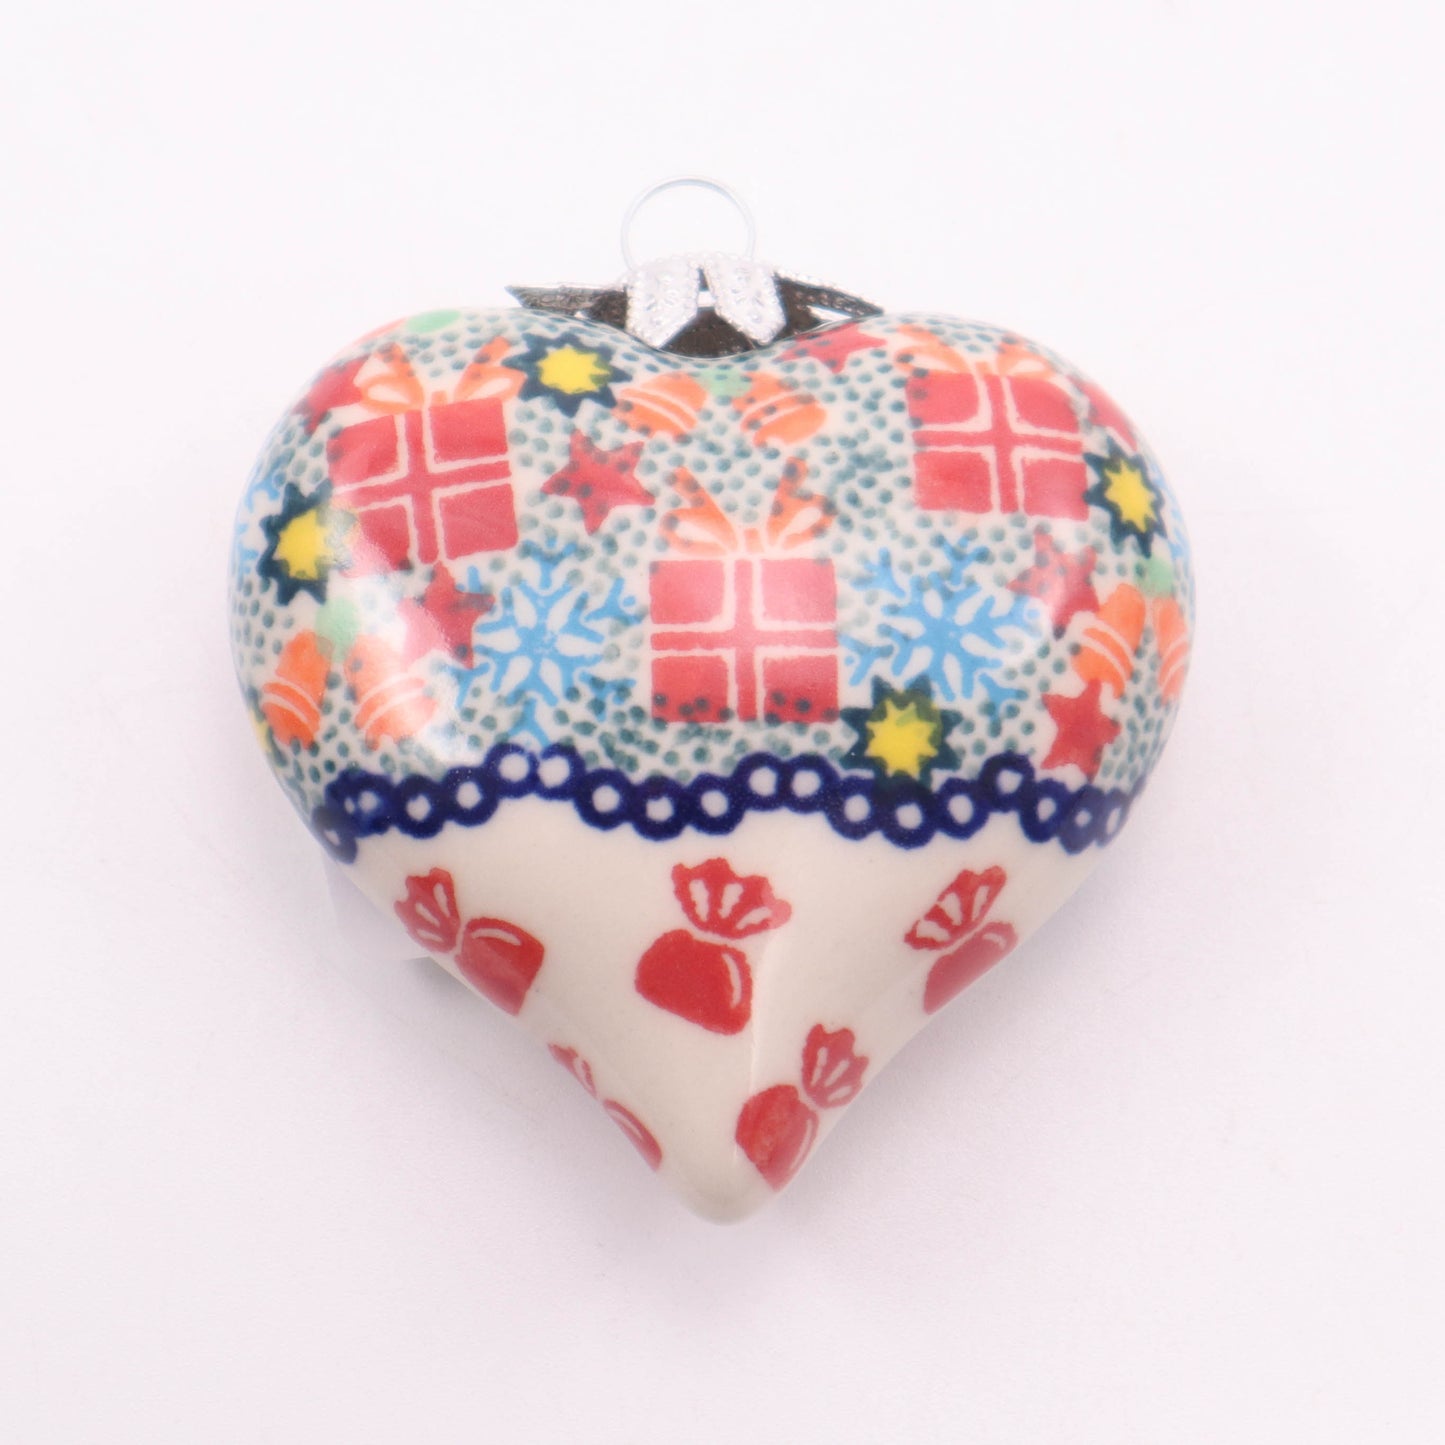 2.5"x2.5" Heart Ornament. Pattern: Gifts